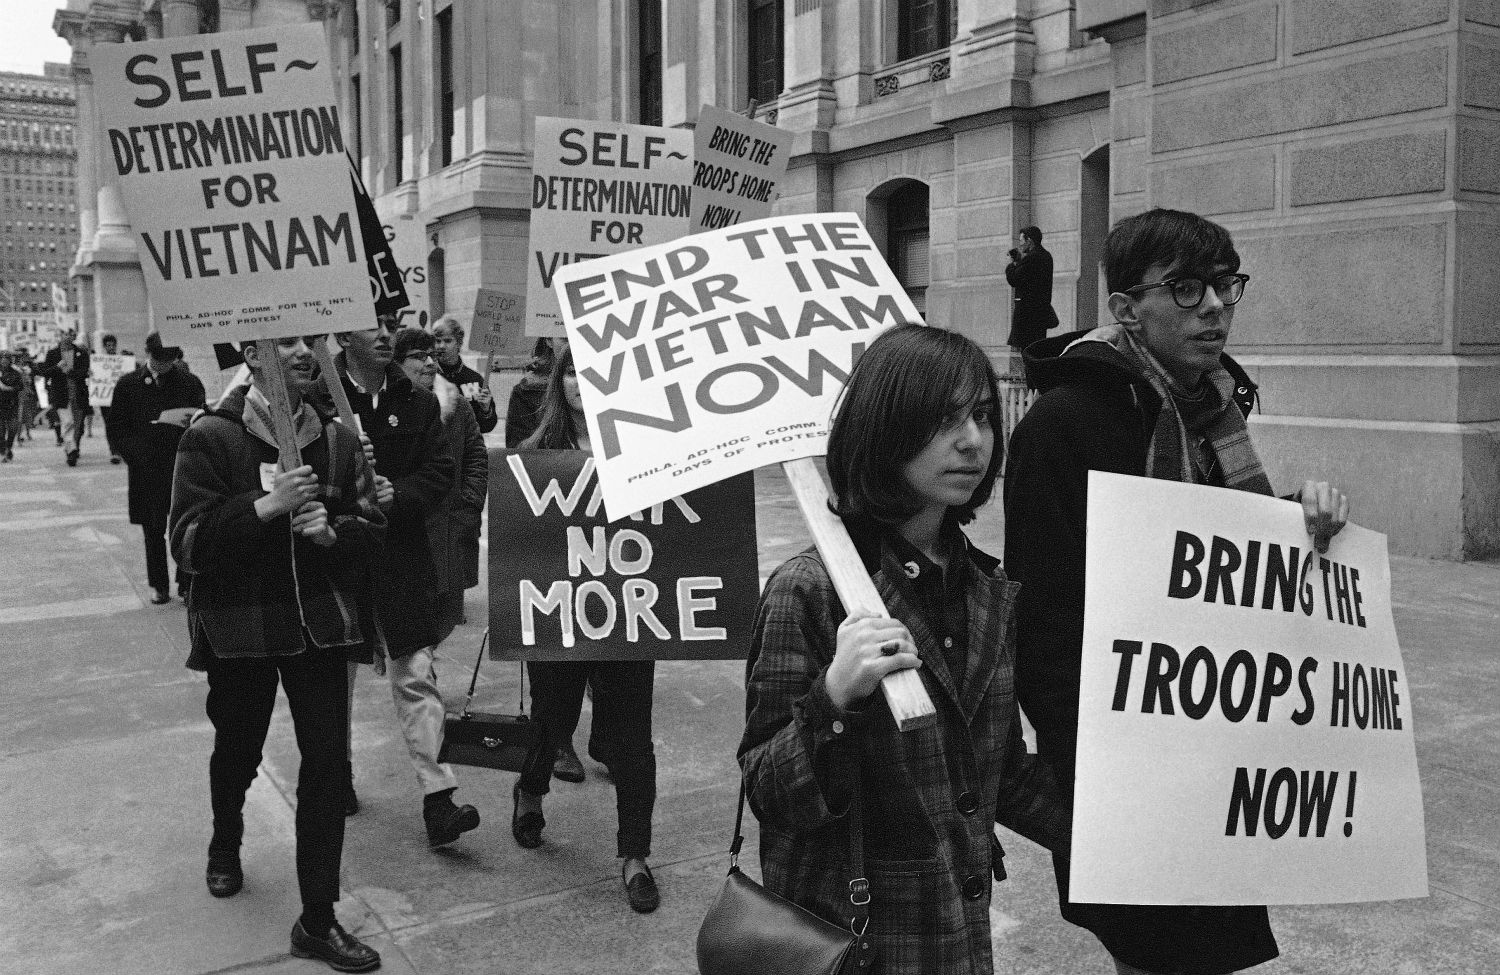 Vietnam War protesters in 1966. Credit: The Nation, AP Photo/Bill Ingraham